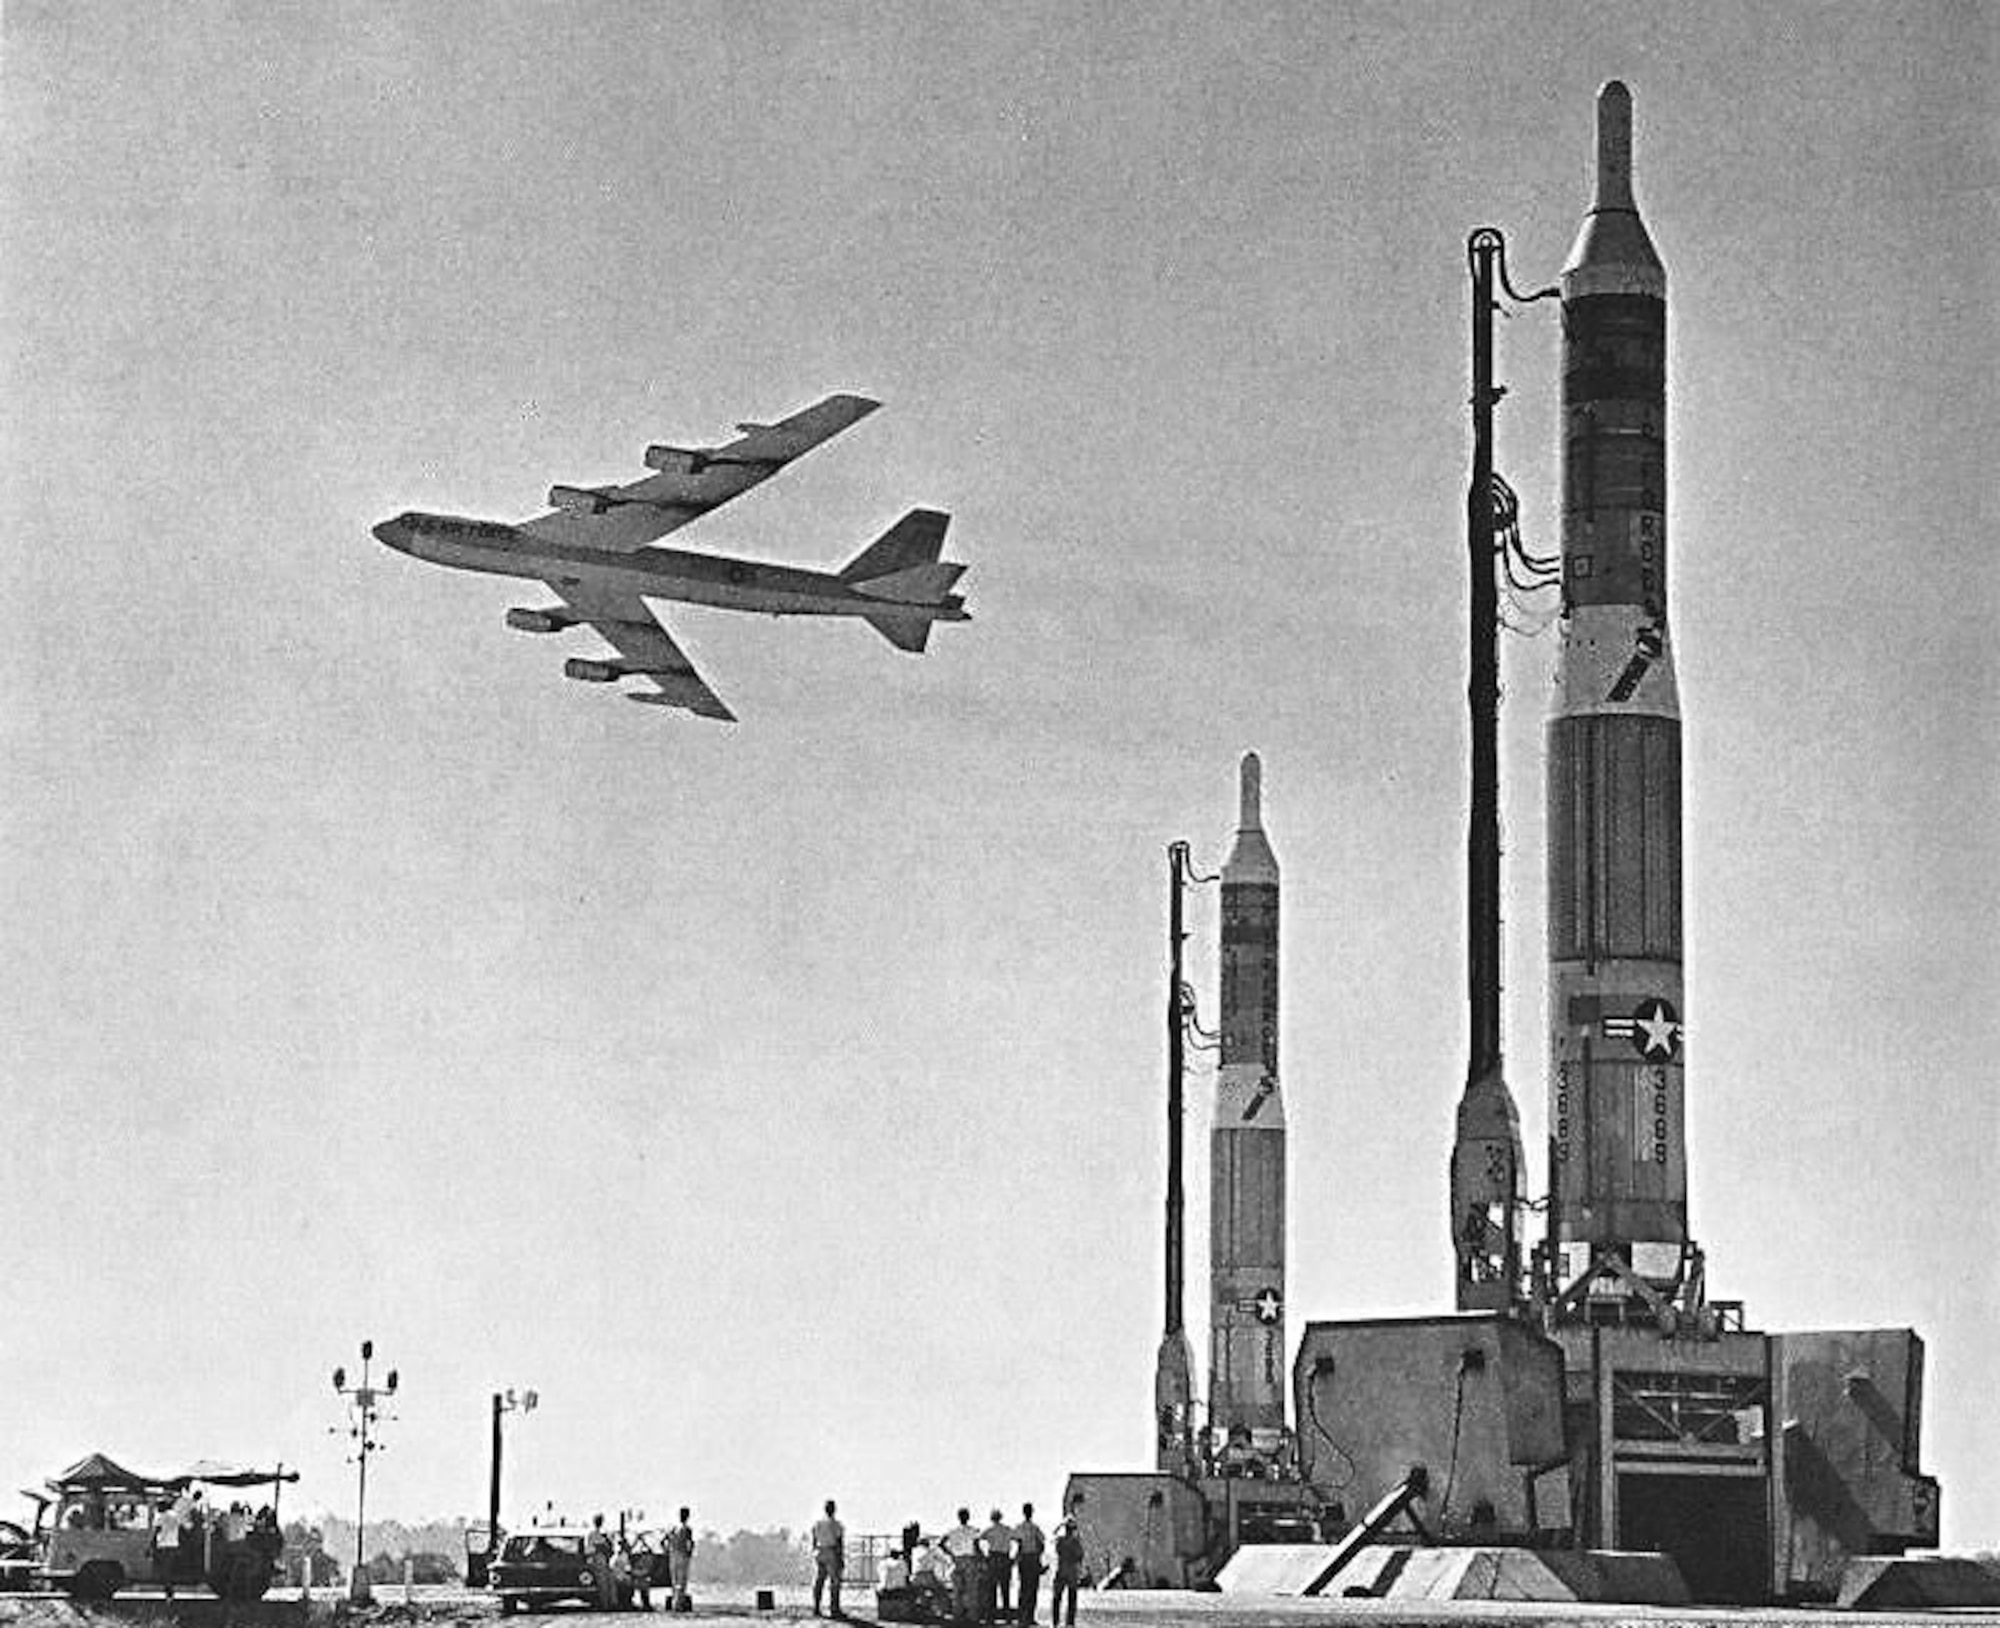 Two Titan I missiles stand ready to launch as a B-52 Stratofortress flies overhead. The Titan I missile was the first multi-stage intercontinental ballistic missile and was used as a nuclear deterrent during the early 1960's. (Historical Archives Official U.S. Air Force Photo)